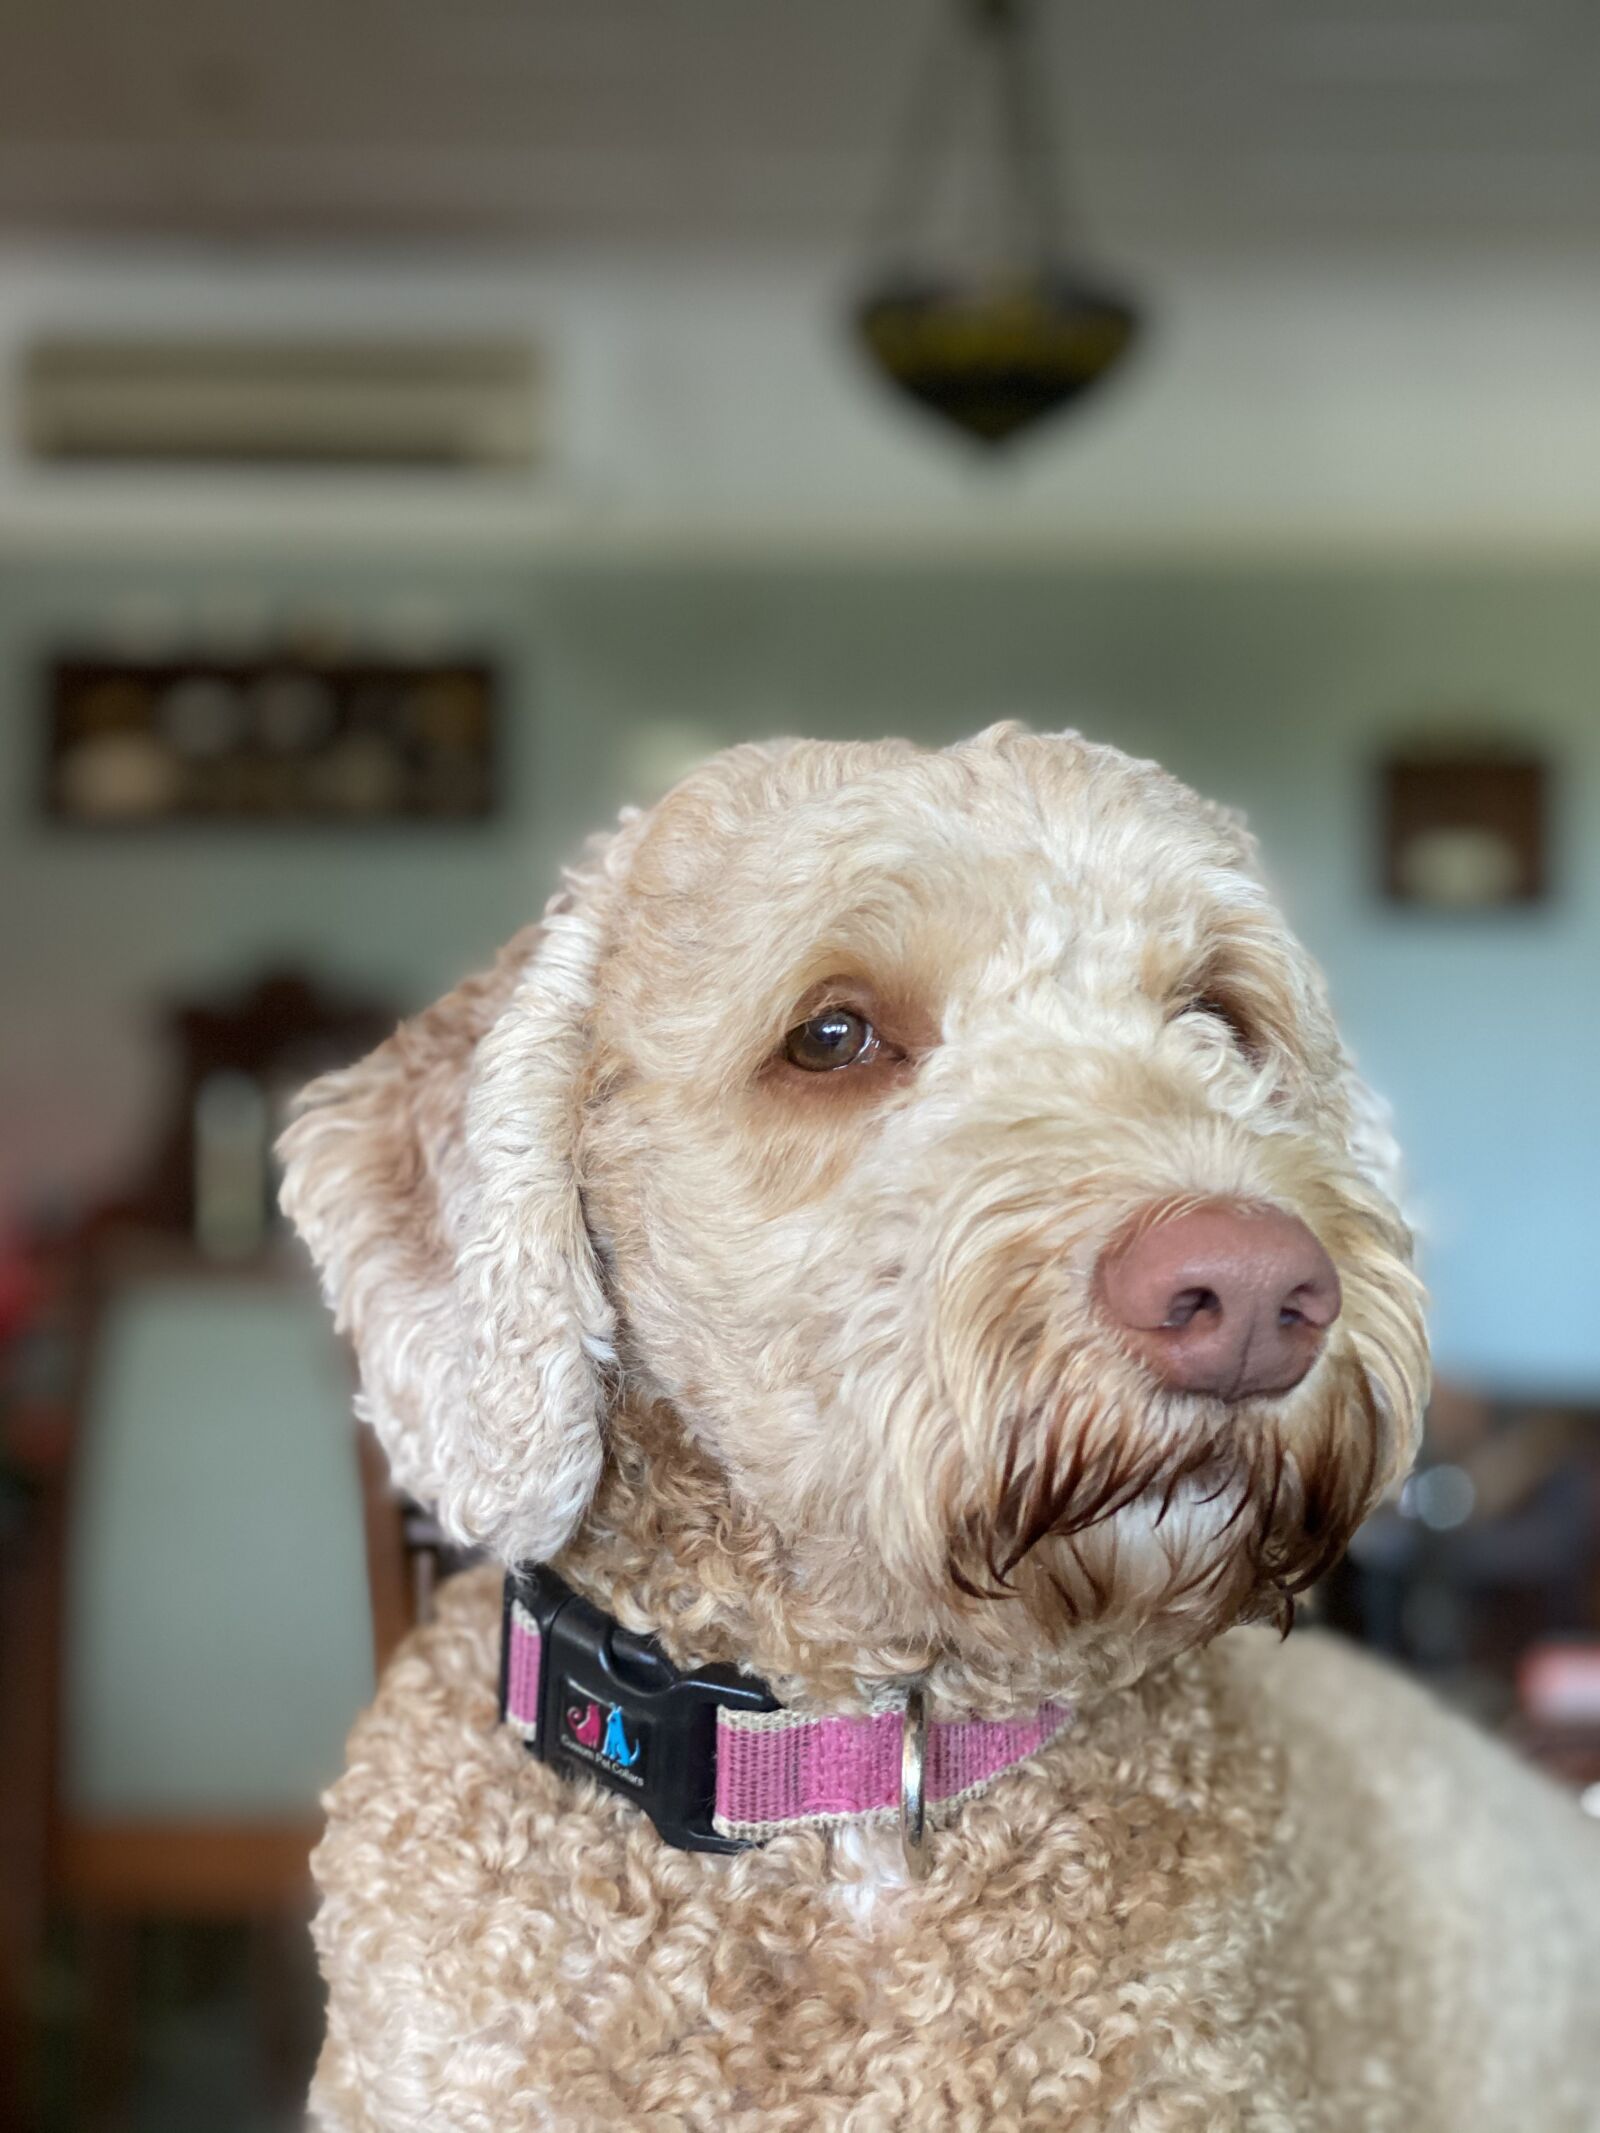 Apple iPhone 11 Pro Max + iPhone 11 Pro Max back dual camera 6mm f/2 sample photo. Dog, labradoodle, poodle photography